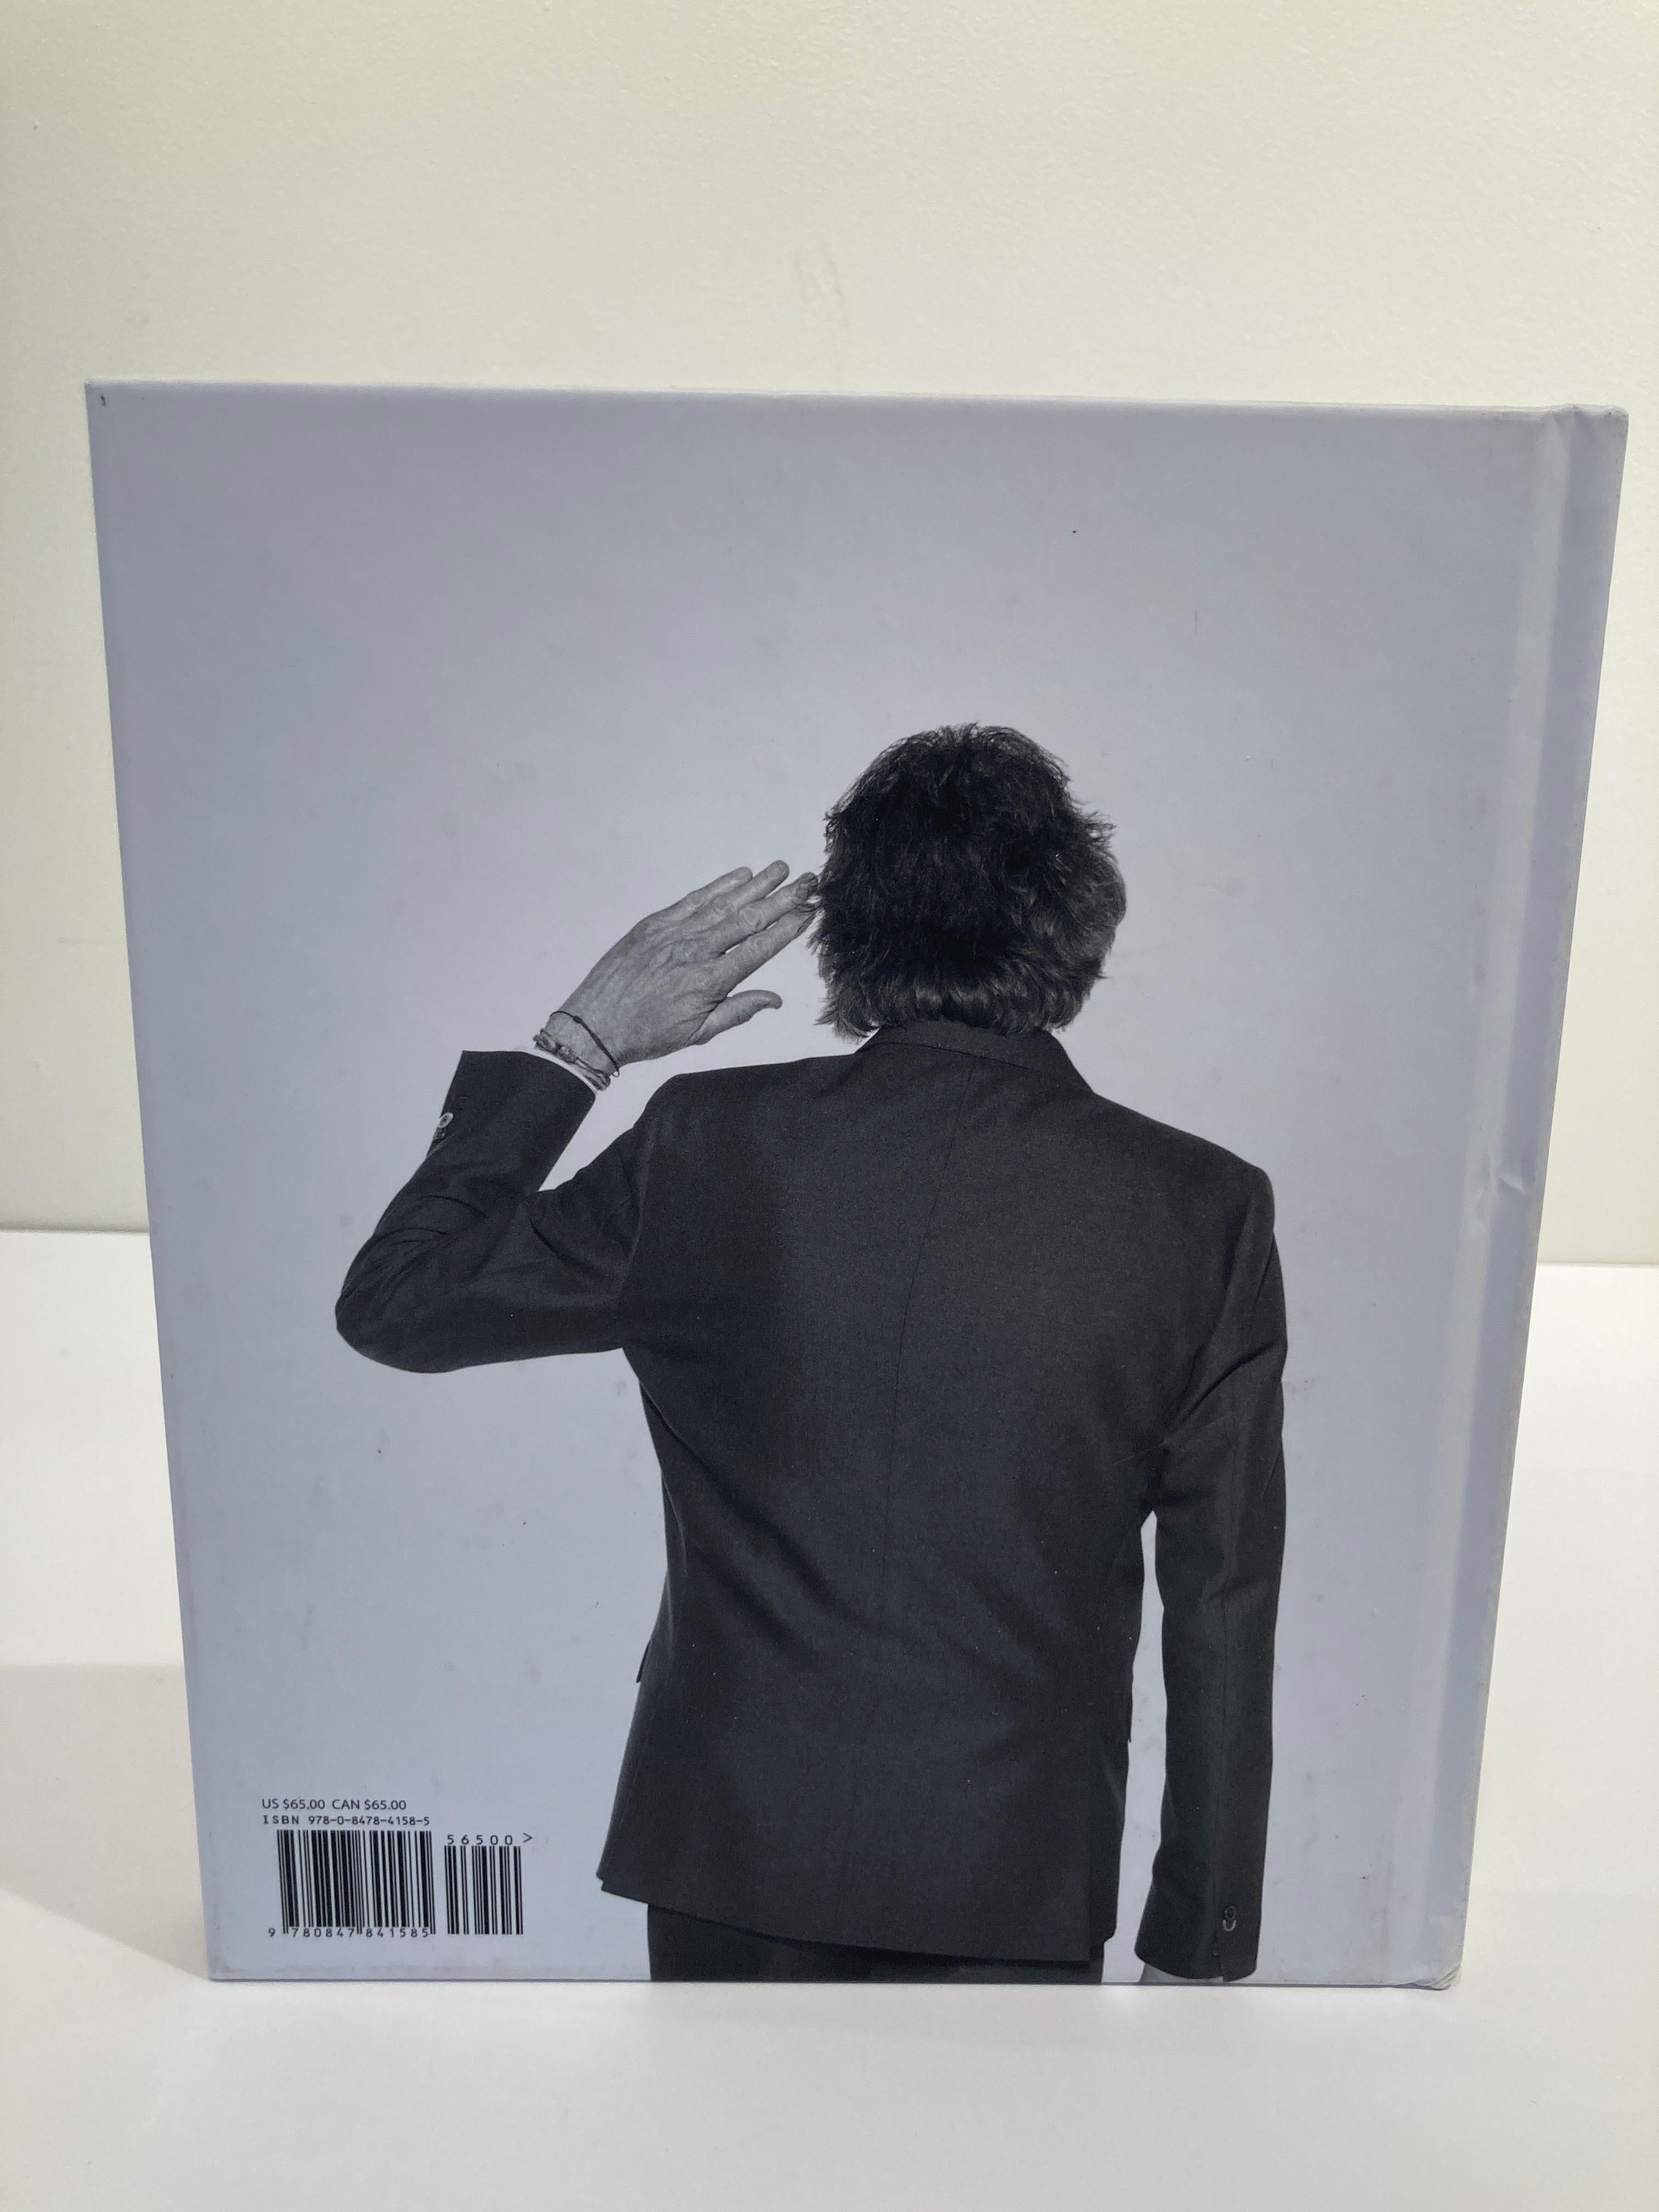 20th Century Hello, My Name Is Paul Smith: Fashion and Other Stories Book For Sale